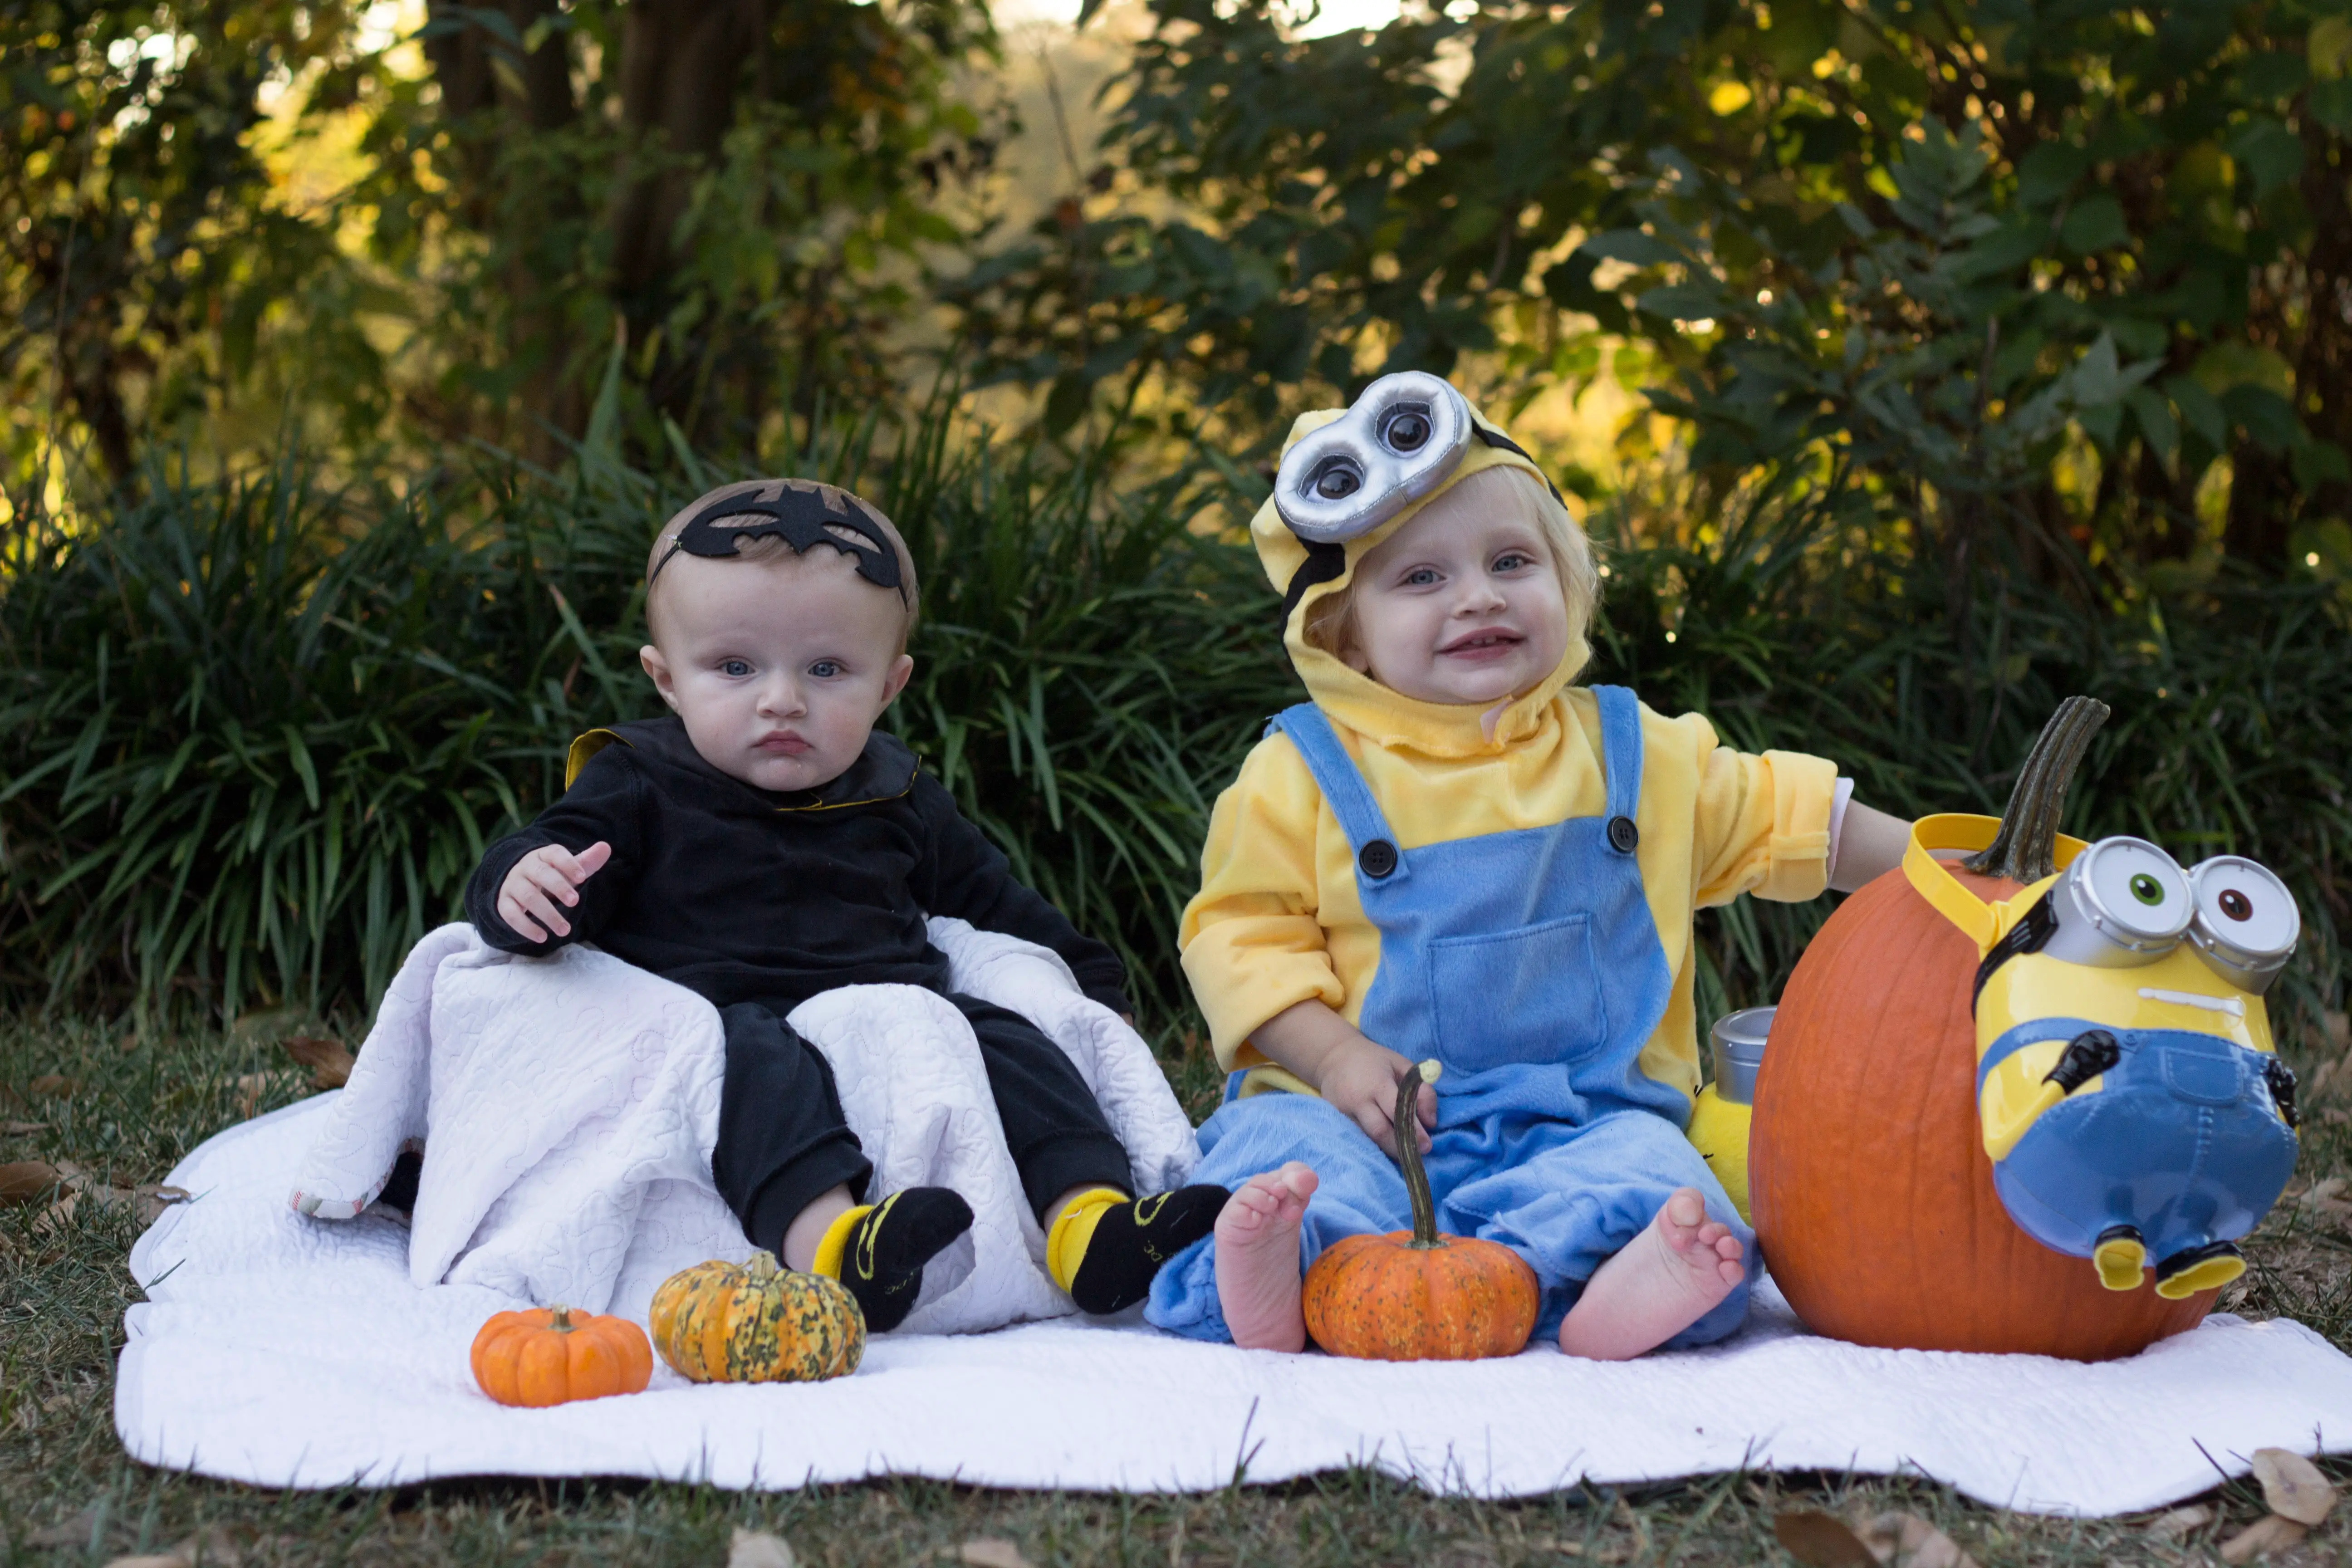 Young kids dressed up in halloween costumes - tips to stay safe with food allergies on Halloween